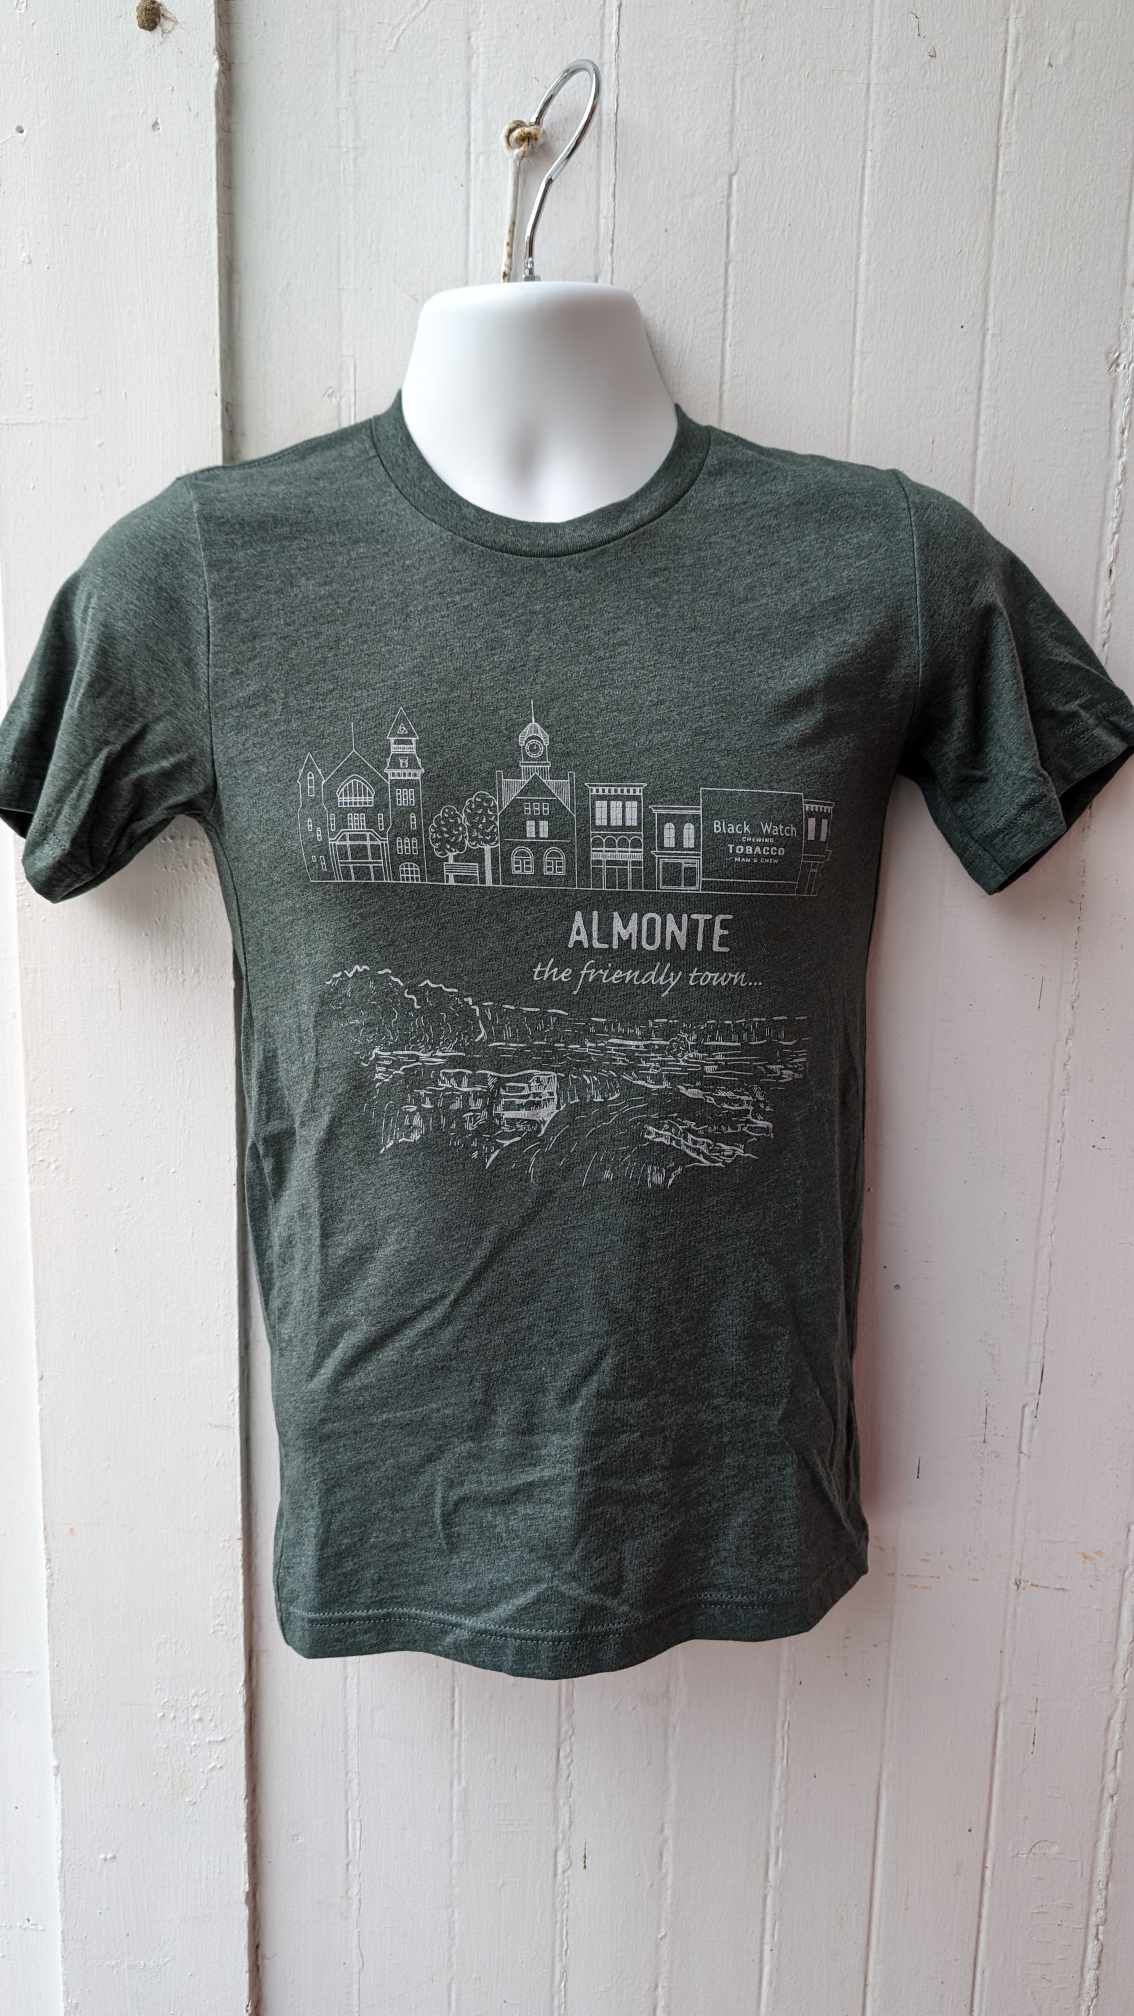 Almonte Tee